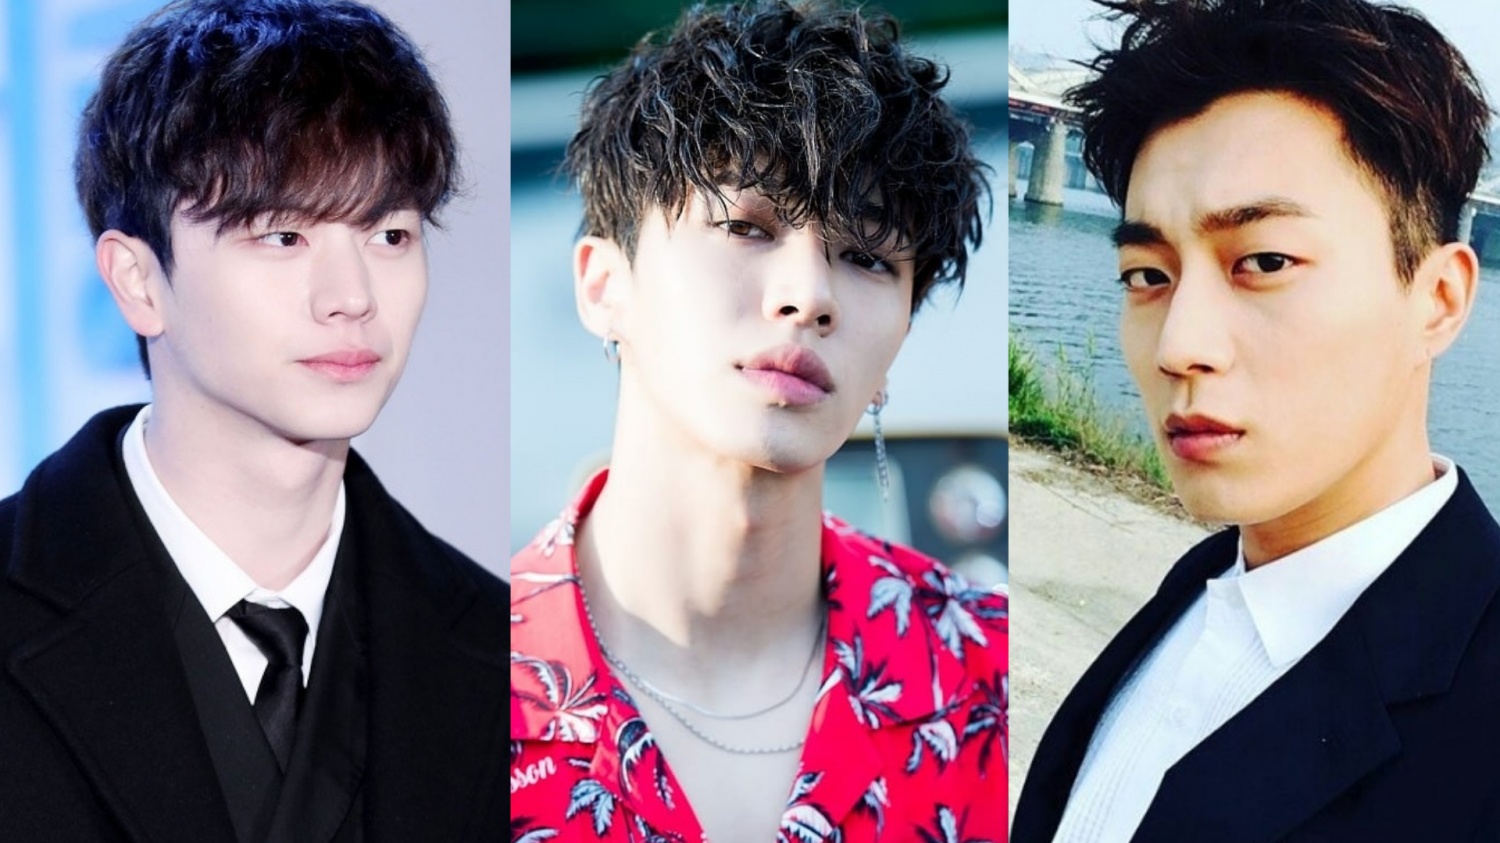 UPDATE: “Special Academic Favors” Controversy Involving These K-pop Idols is Still Ongoing